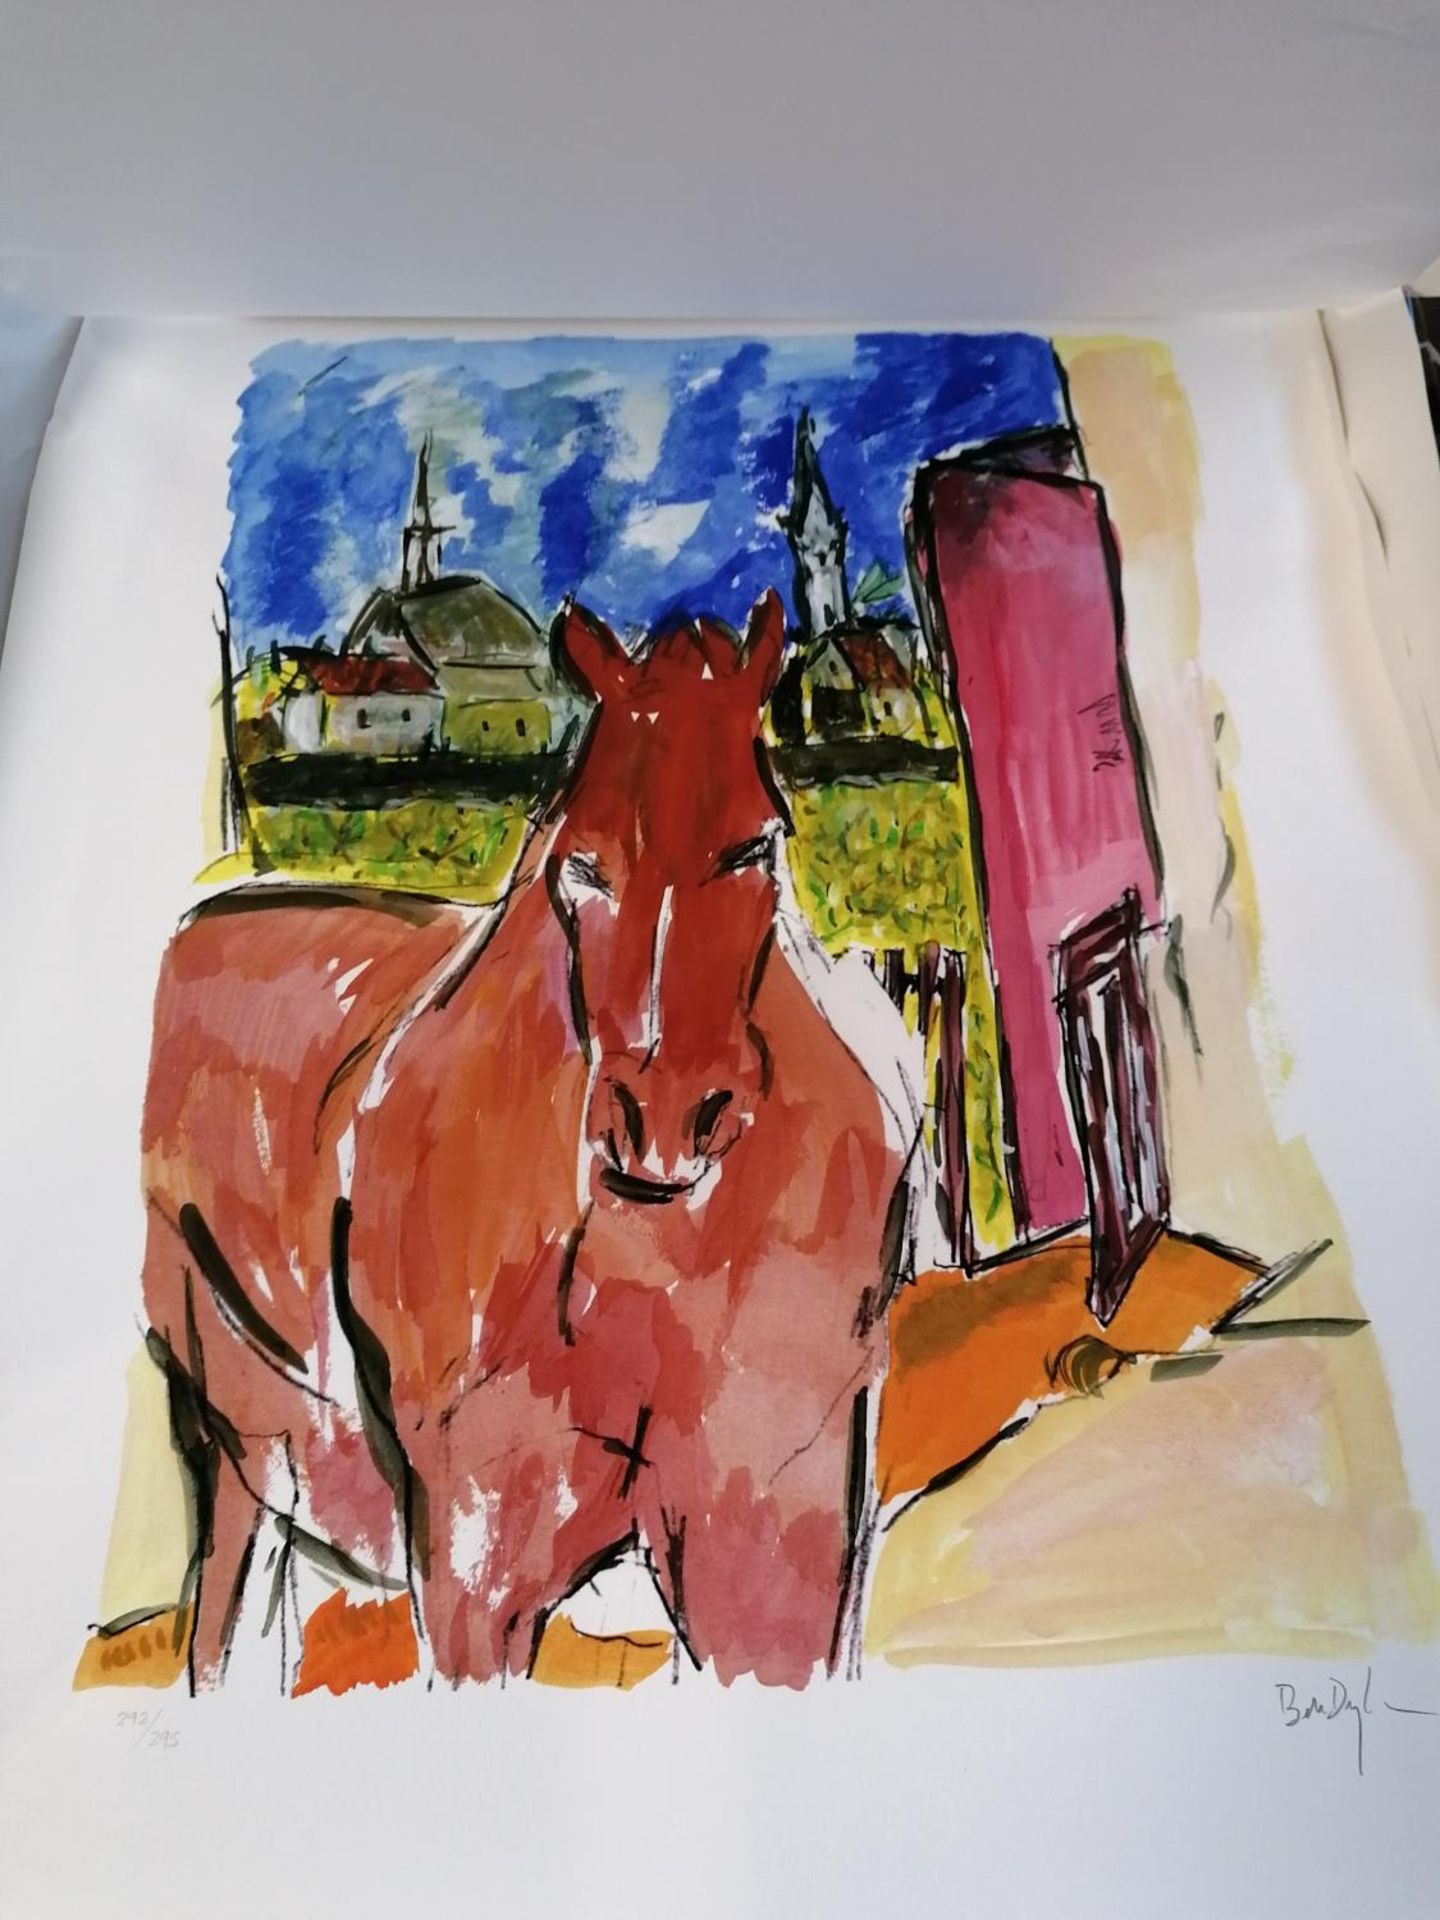 A BOB DYLAN PENCIL SIGNED LIMITED EDITION PRINT - 'HORSE' (2010) FROM THE DRAWN BLANK SERIES, UNFRAM - Image 2 of 5